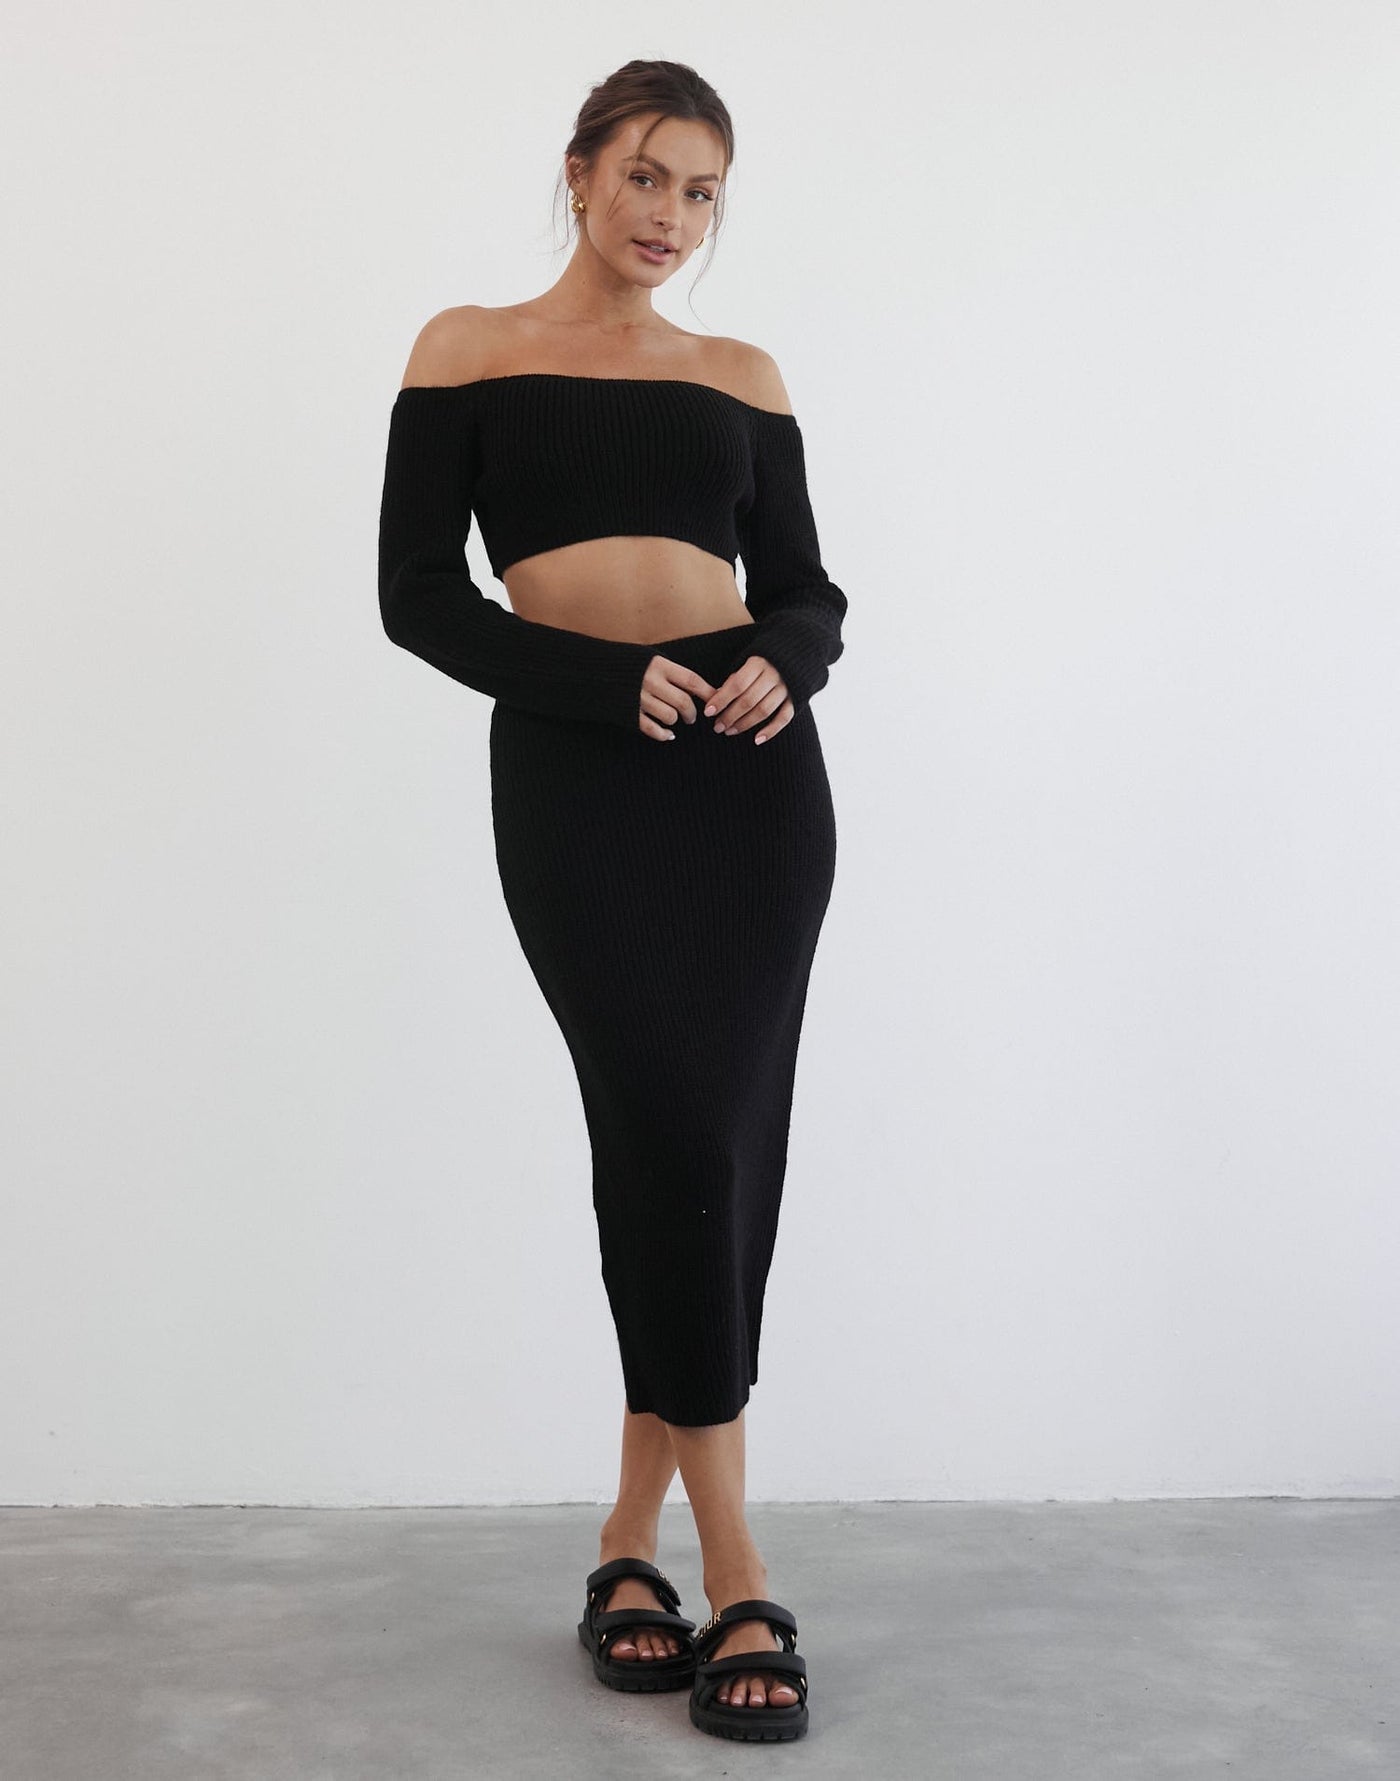 Sharna Long Sleeve Knit Top (Black) - Long Sleeve Knit Top - Women's Outfit Sets - Charcoal Clothing